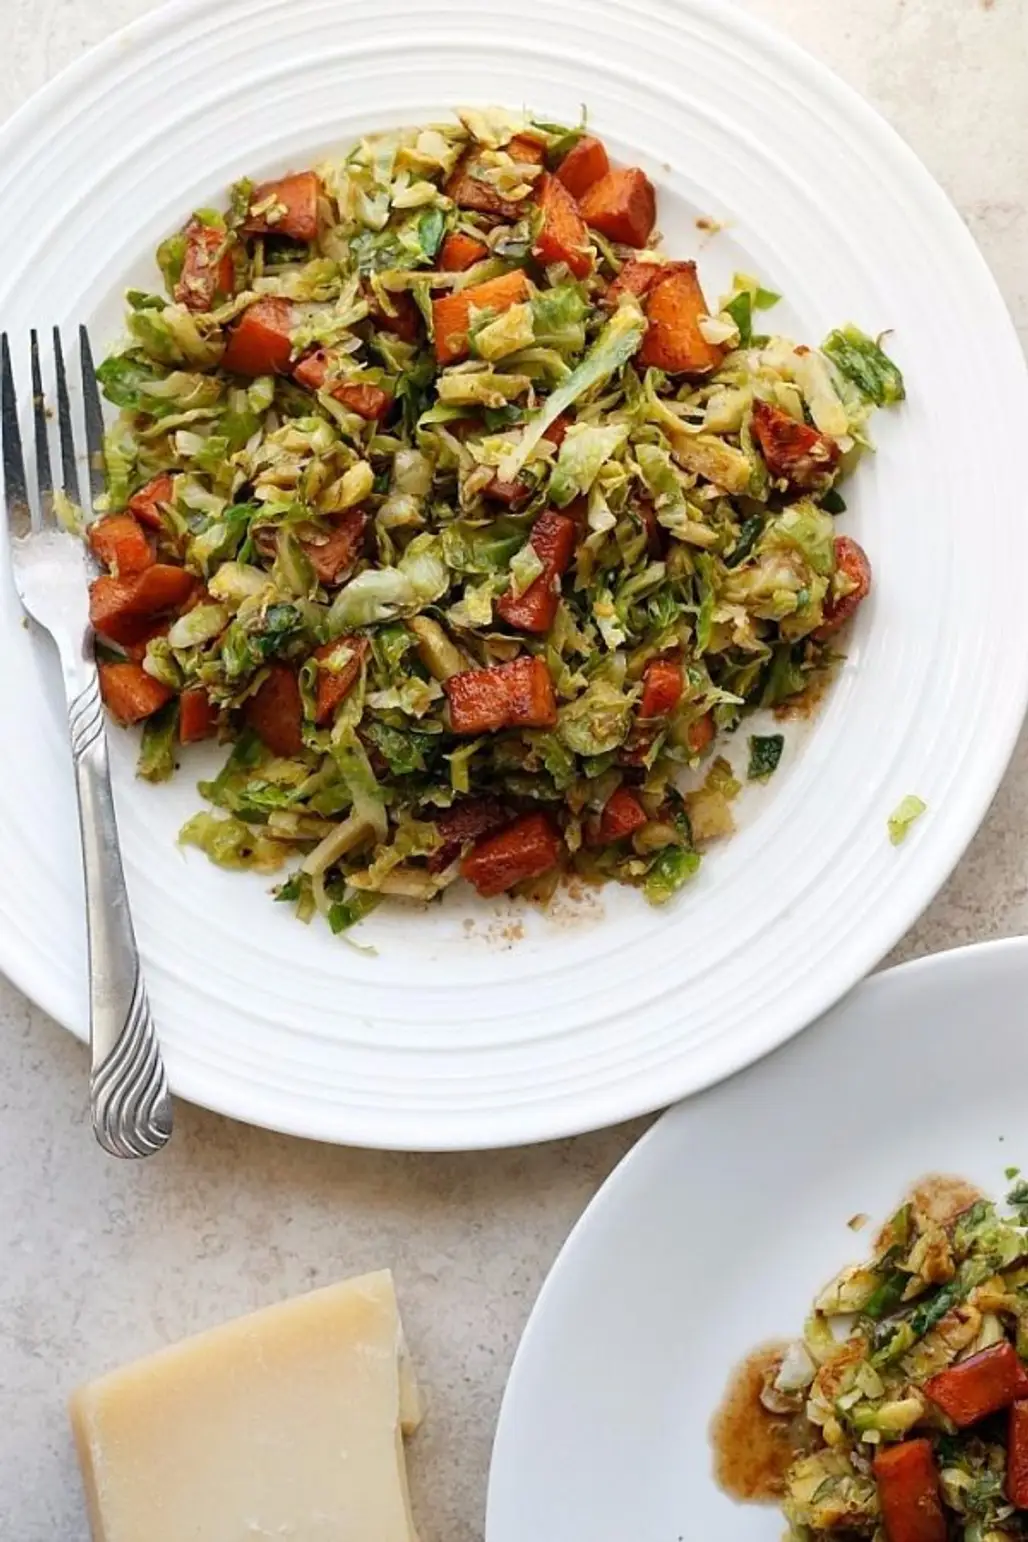 Warm Sweet Potato and Brussels Sprouts Salad with a Parmesan Vinaigrette